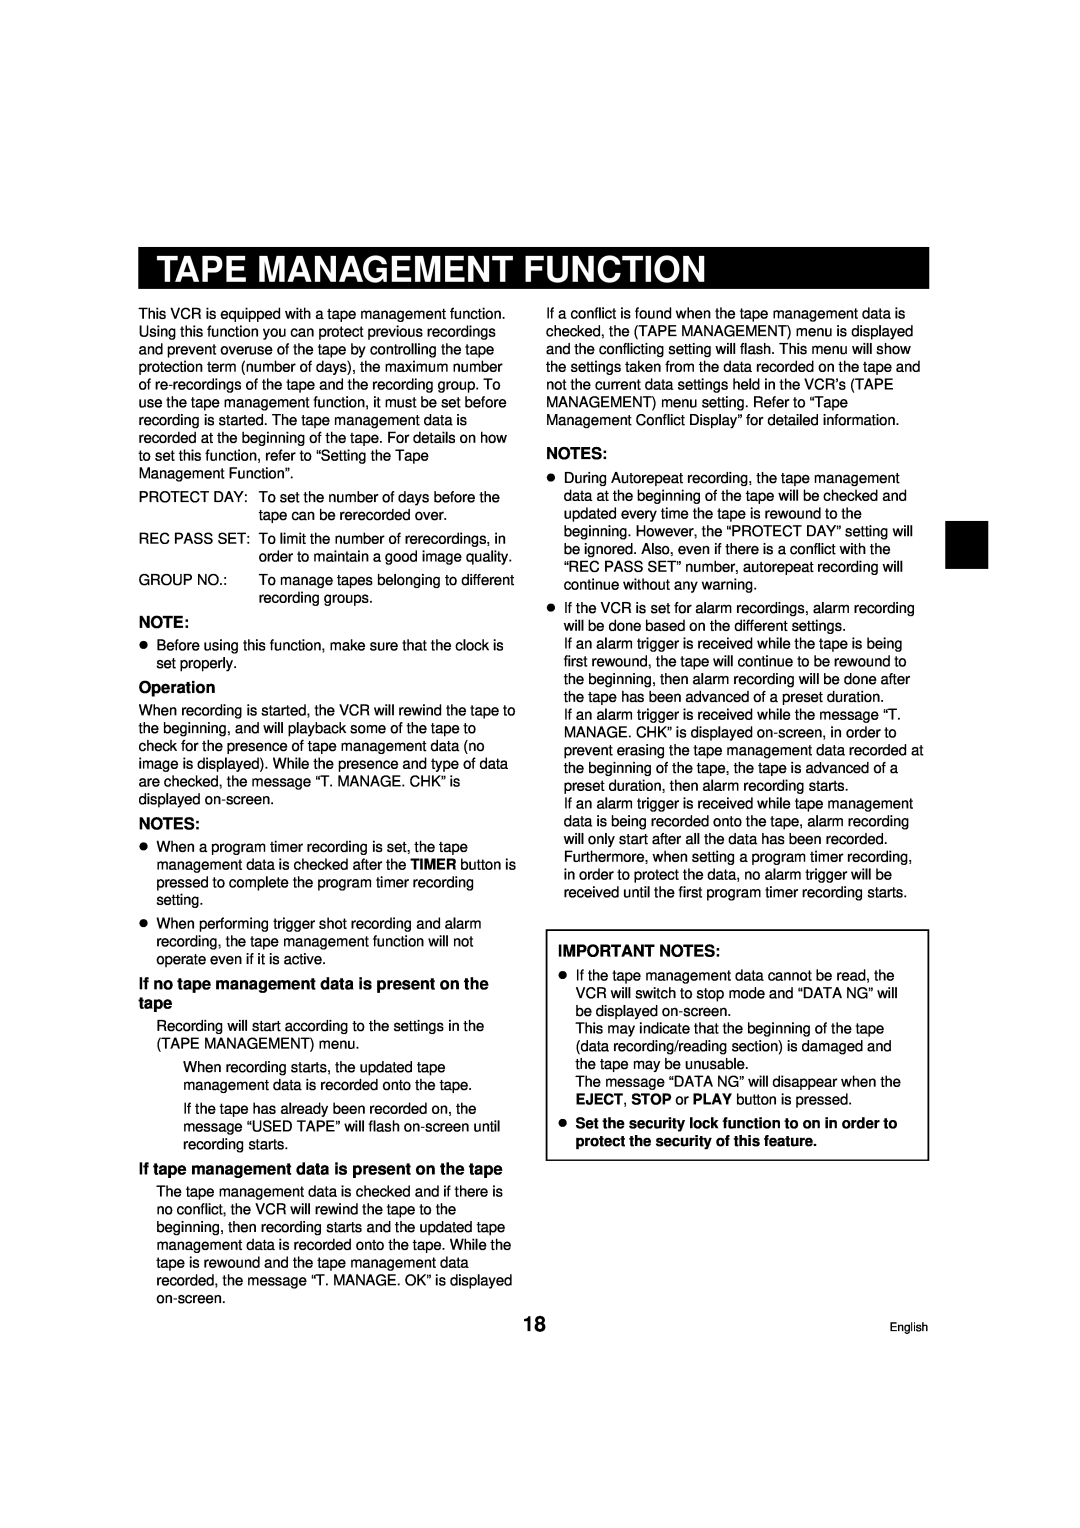 Sanyo RD2QD/NA Tape Management Function, Operation, If no tape management data is present on the tape, Important Notes 